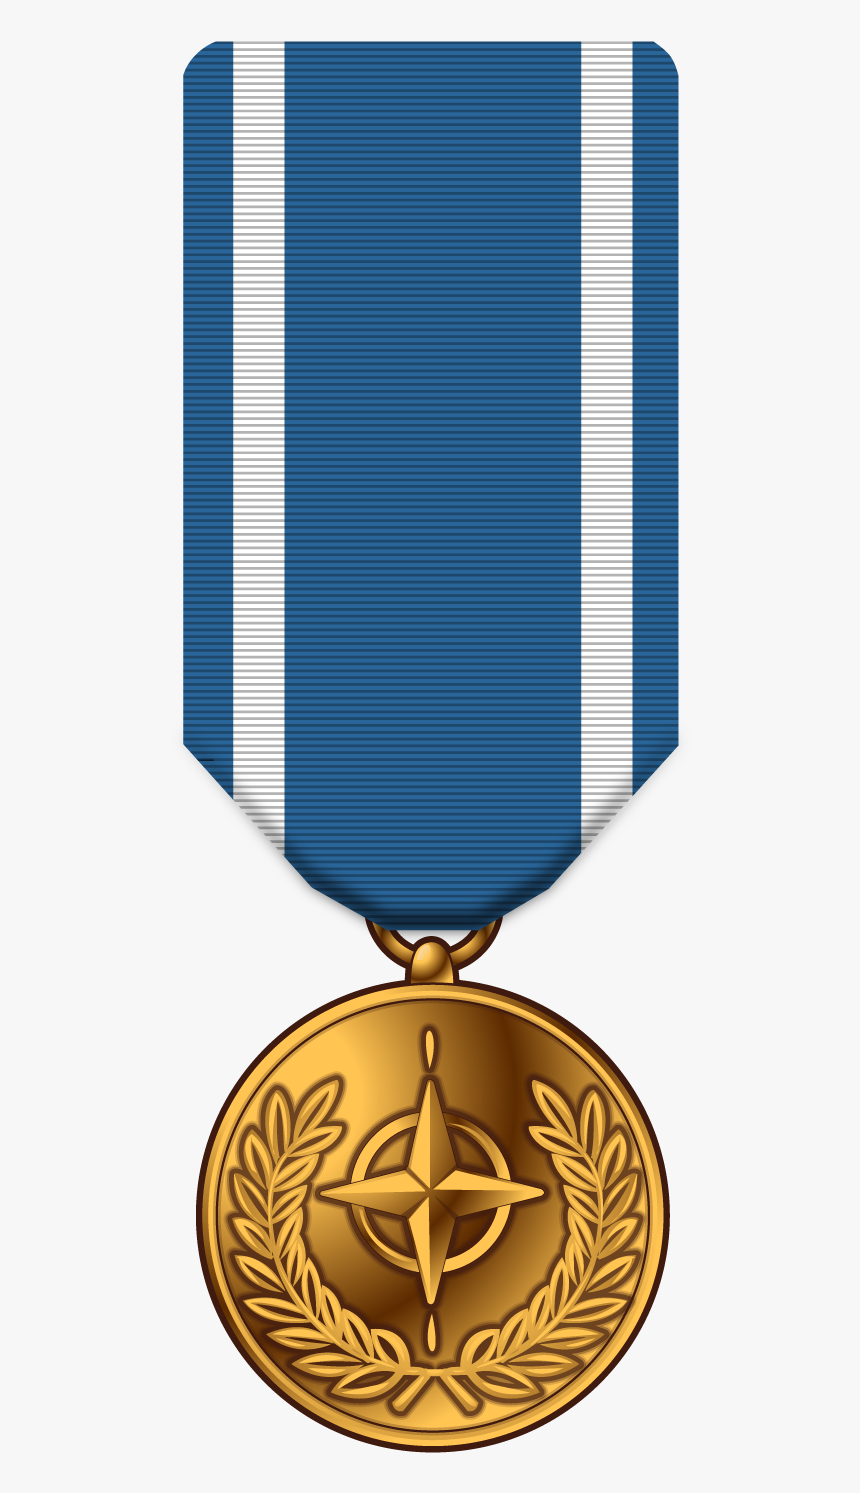 Gold Medal Png - All Military Medals No Background, Transparent Png, Free Download